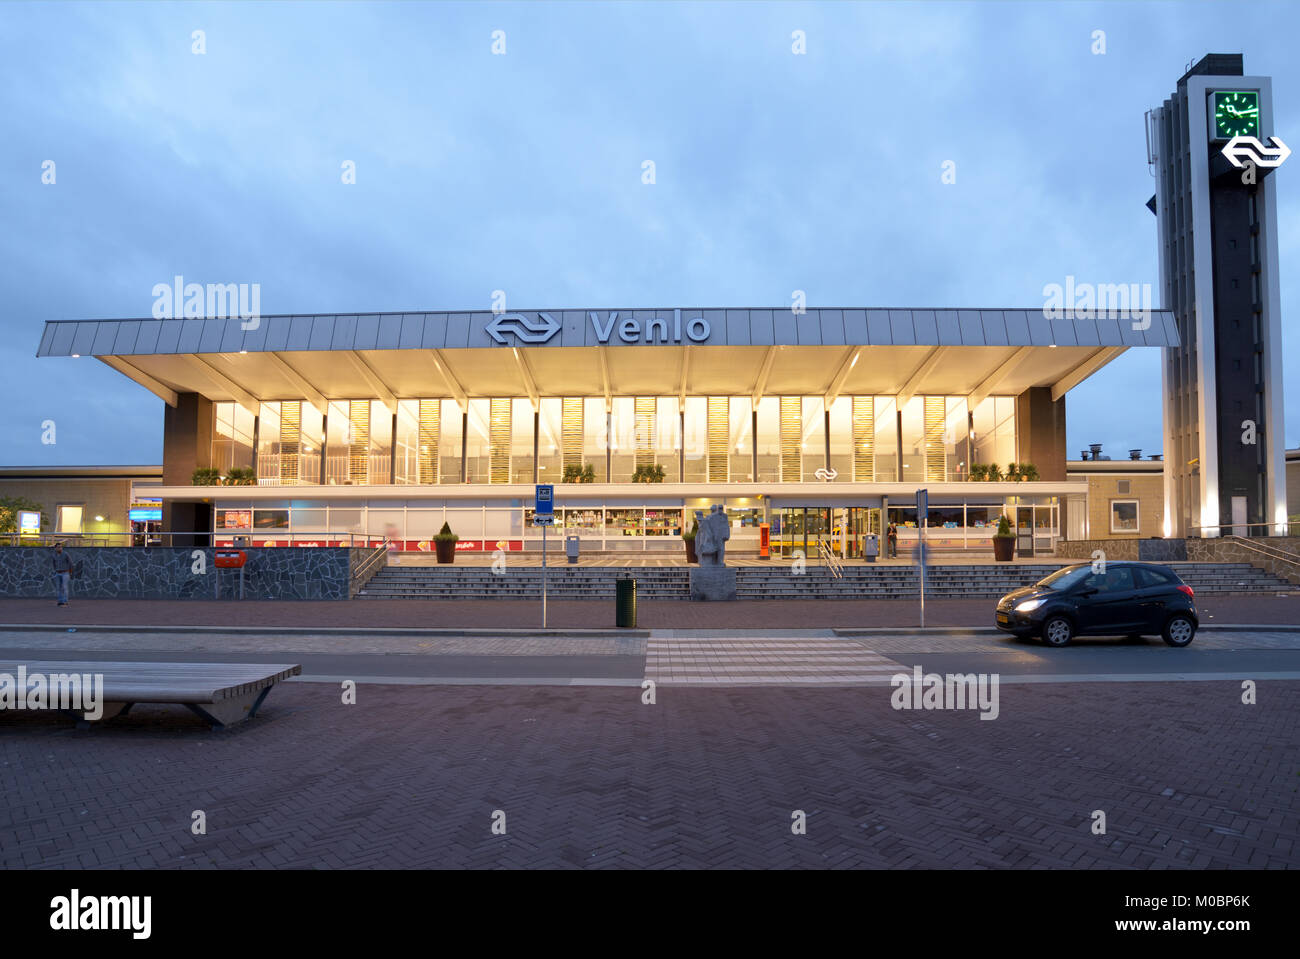 Venlo, Netherlands - June 22, 2013: Train station in Venlo, Netherlands on June 22, 2013. Each year in august the city hosts the Zomerparkfeest, summe Stock Photo